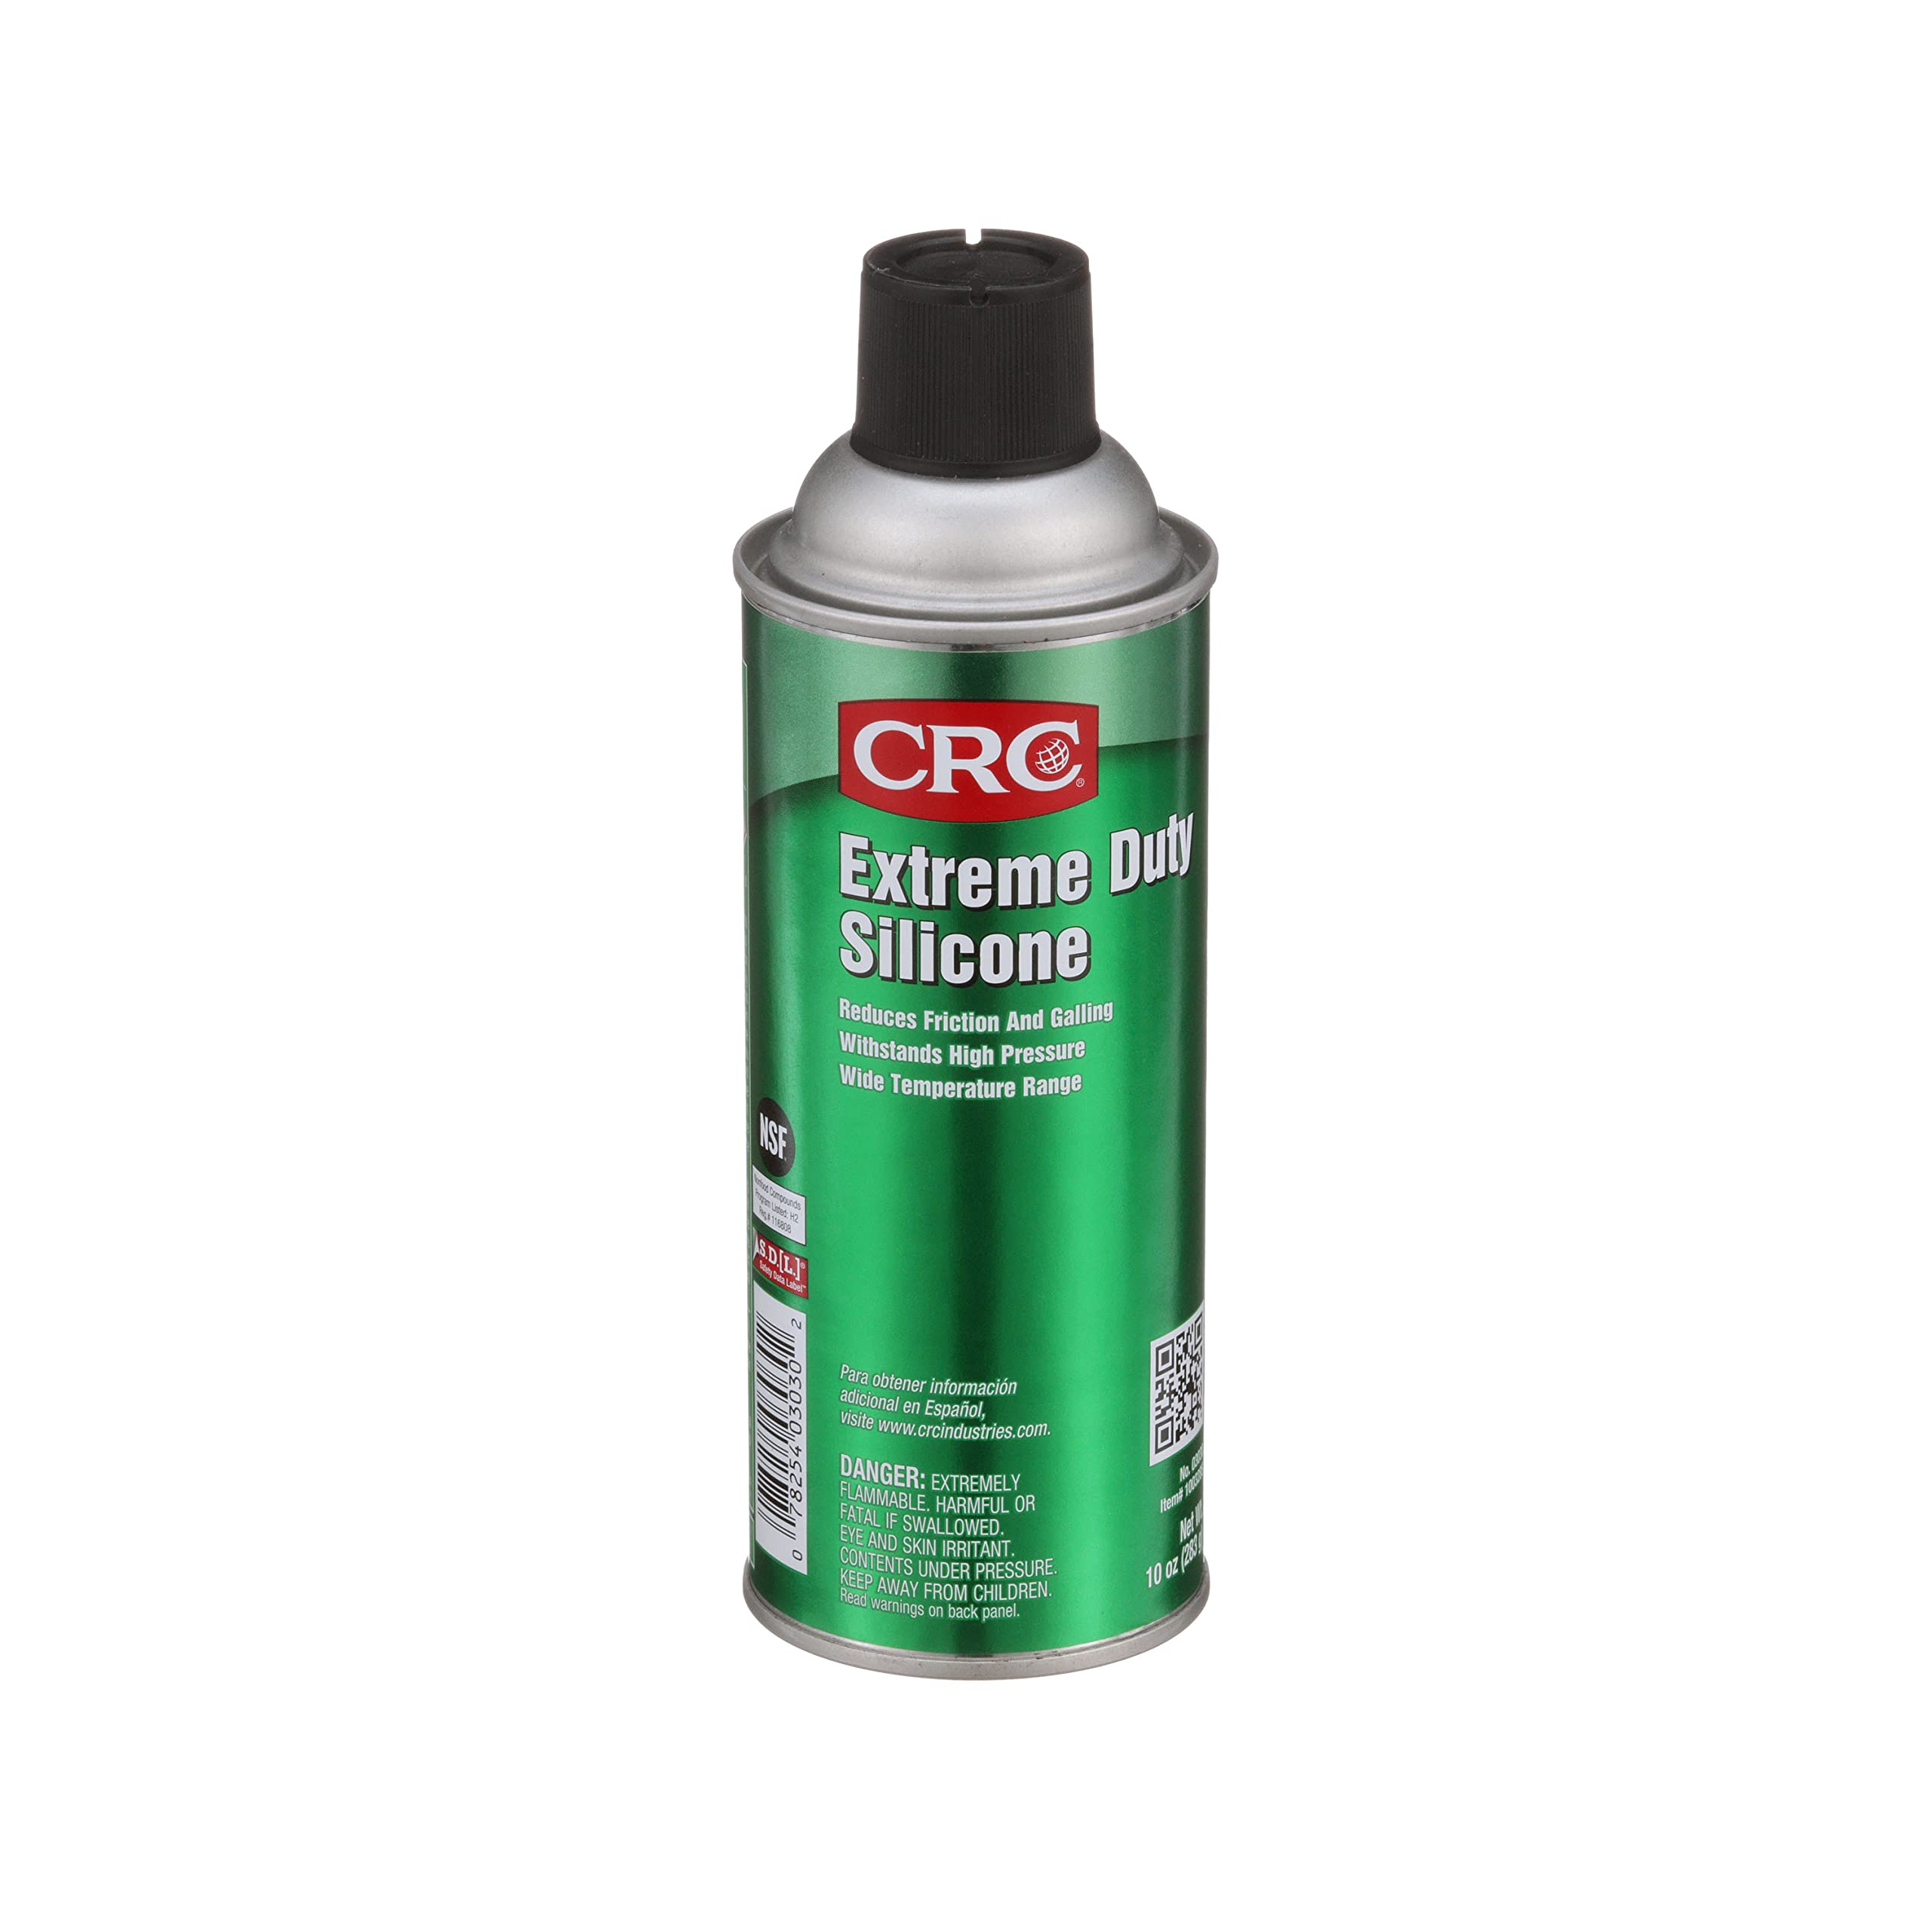 CRC Extreme Duty Silicone Lubricant 03030